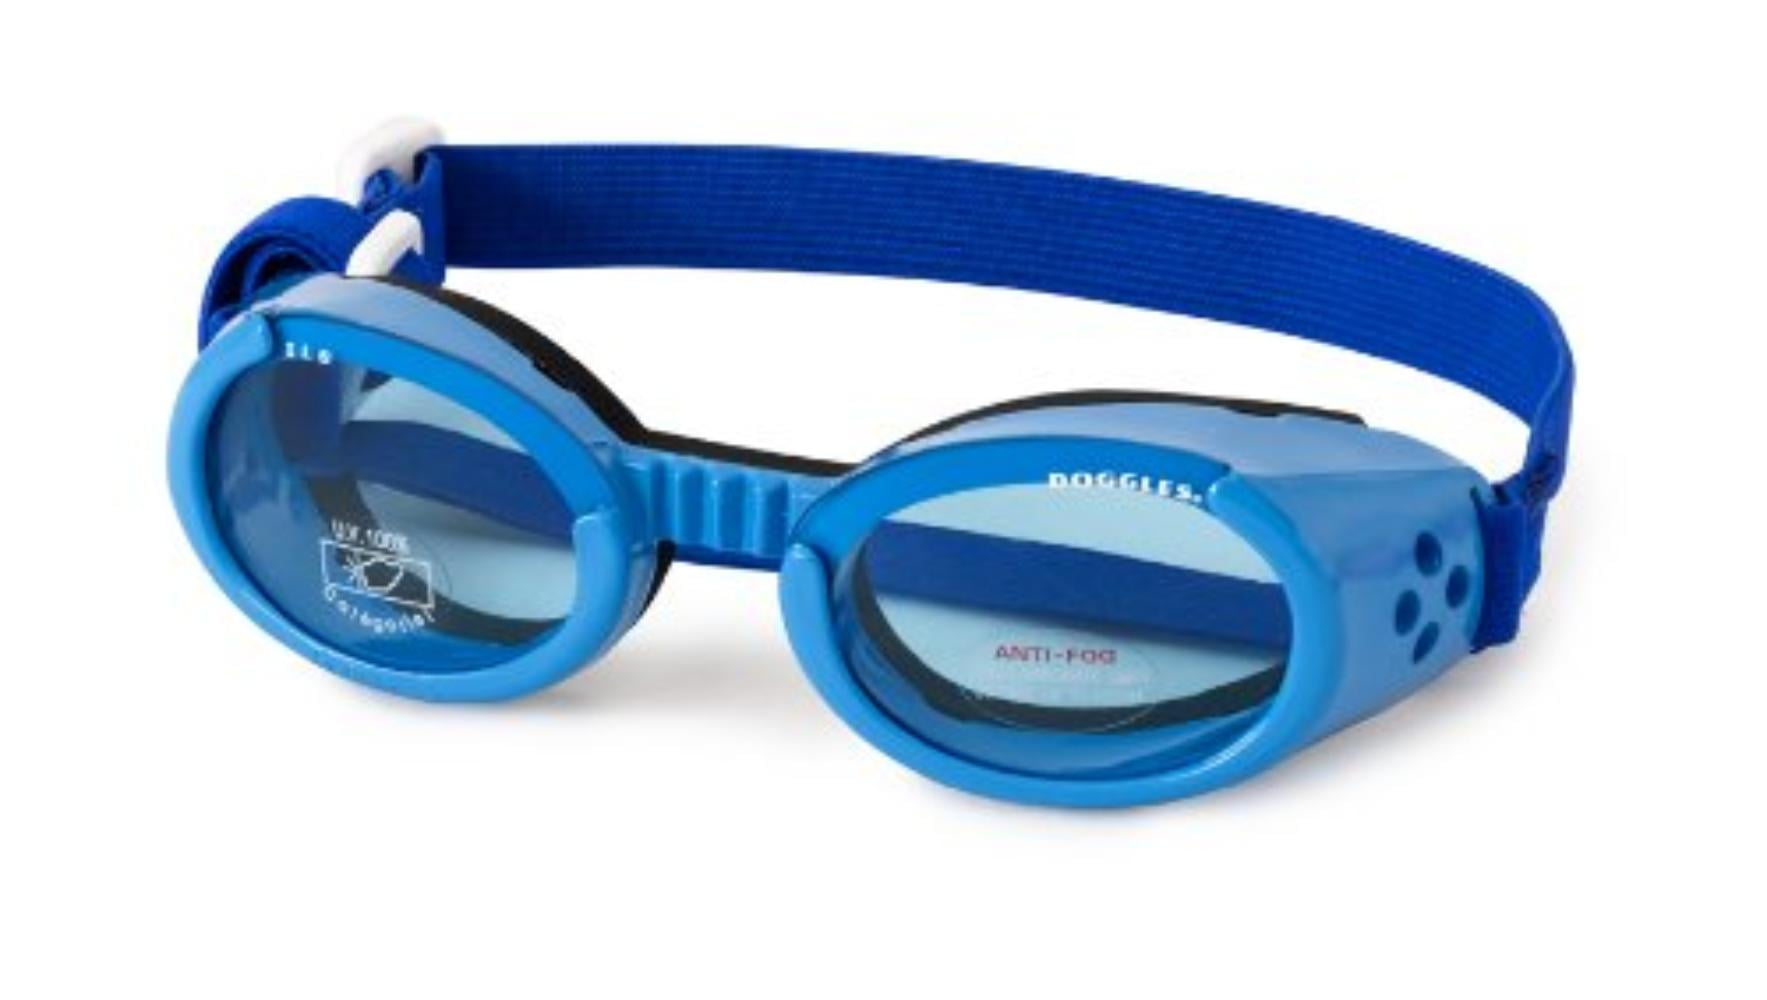 SHINY BLUE ILS DOGGLES WITH BLUE LENS & STRAPS